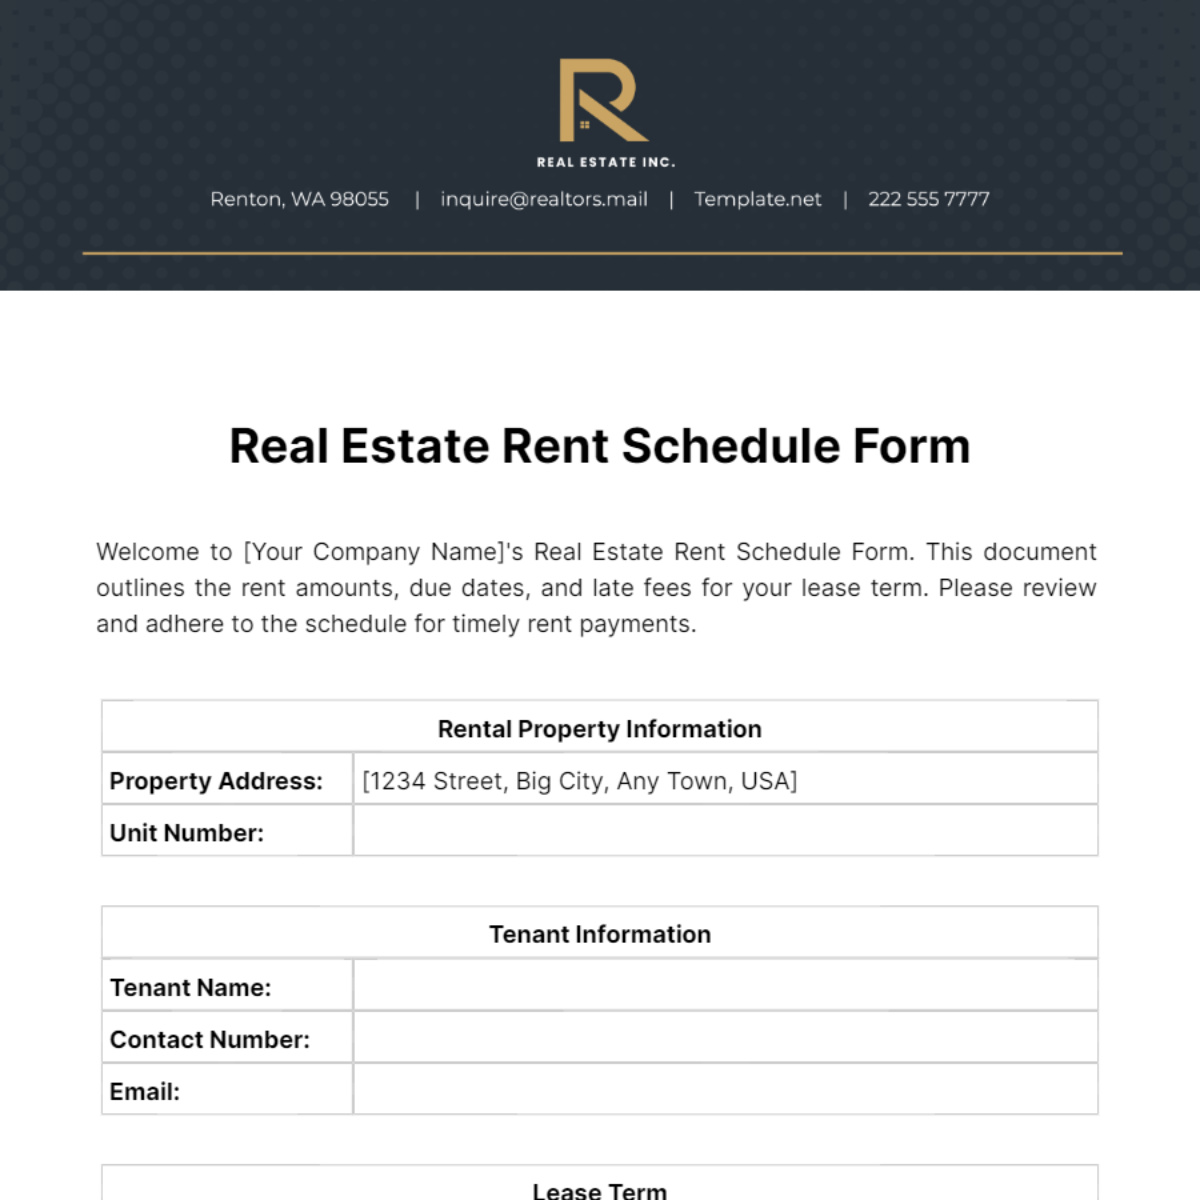 Real Estate Rent Schedule Form Template